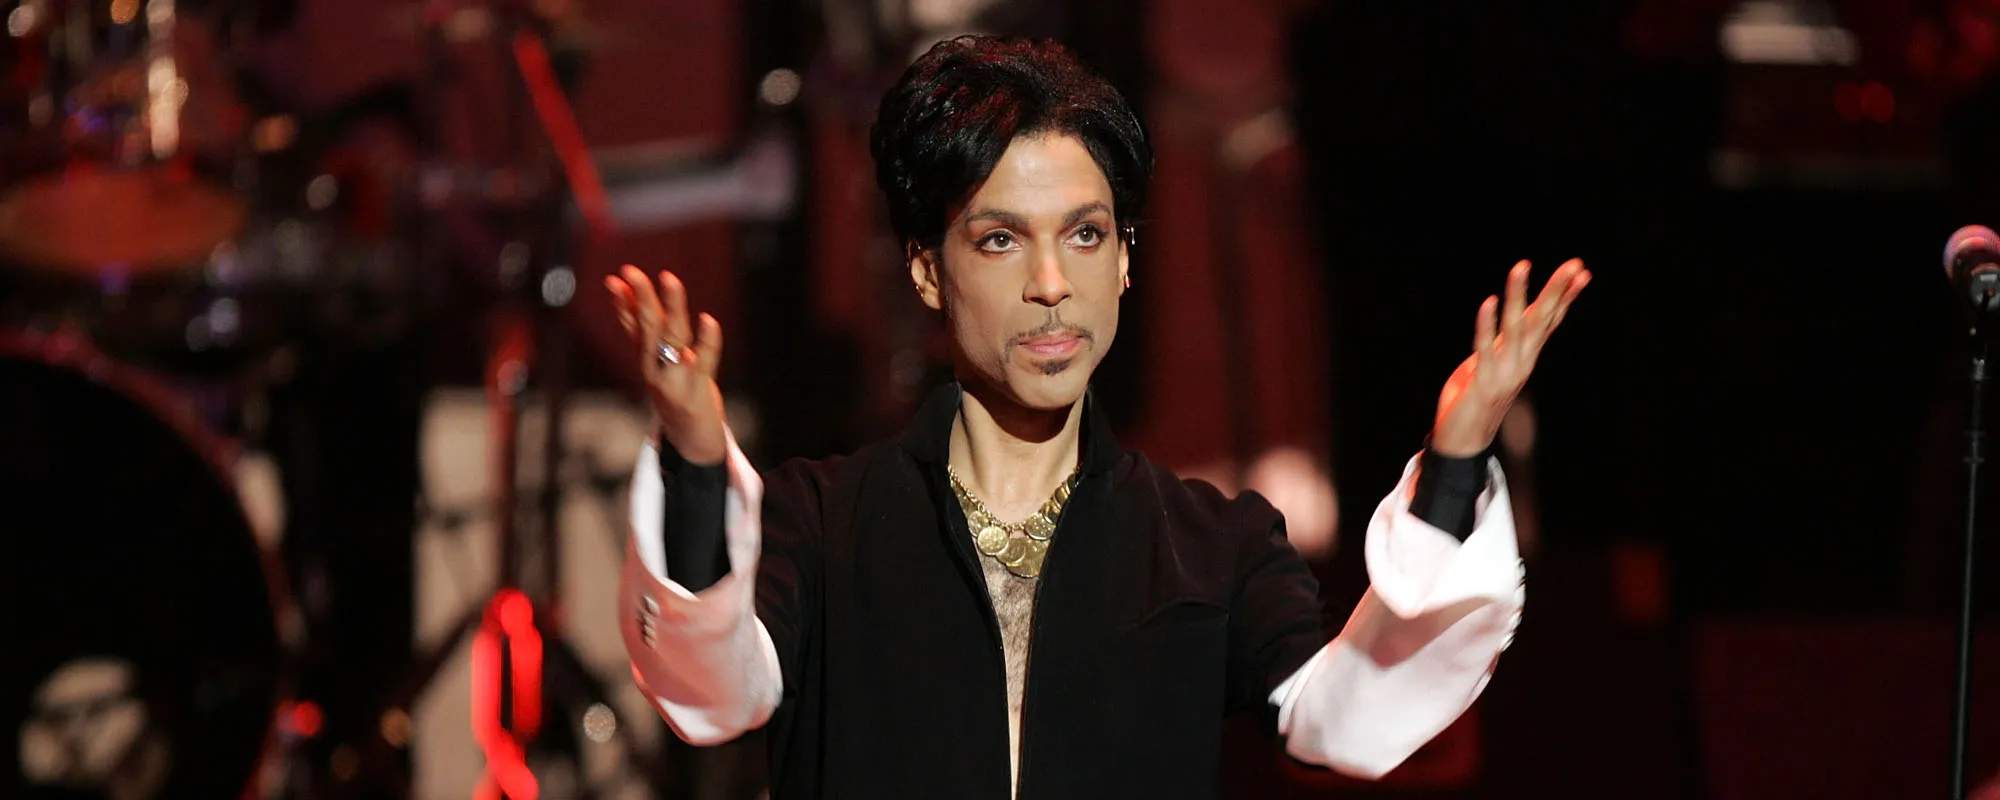 Prince Estate to Unveil Unreleased Music for Celebration Event